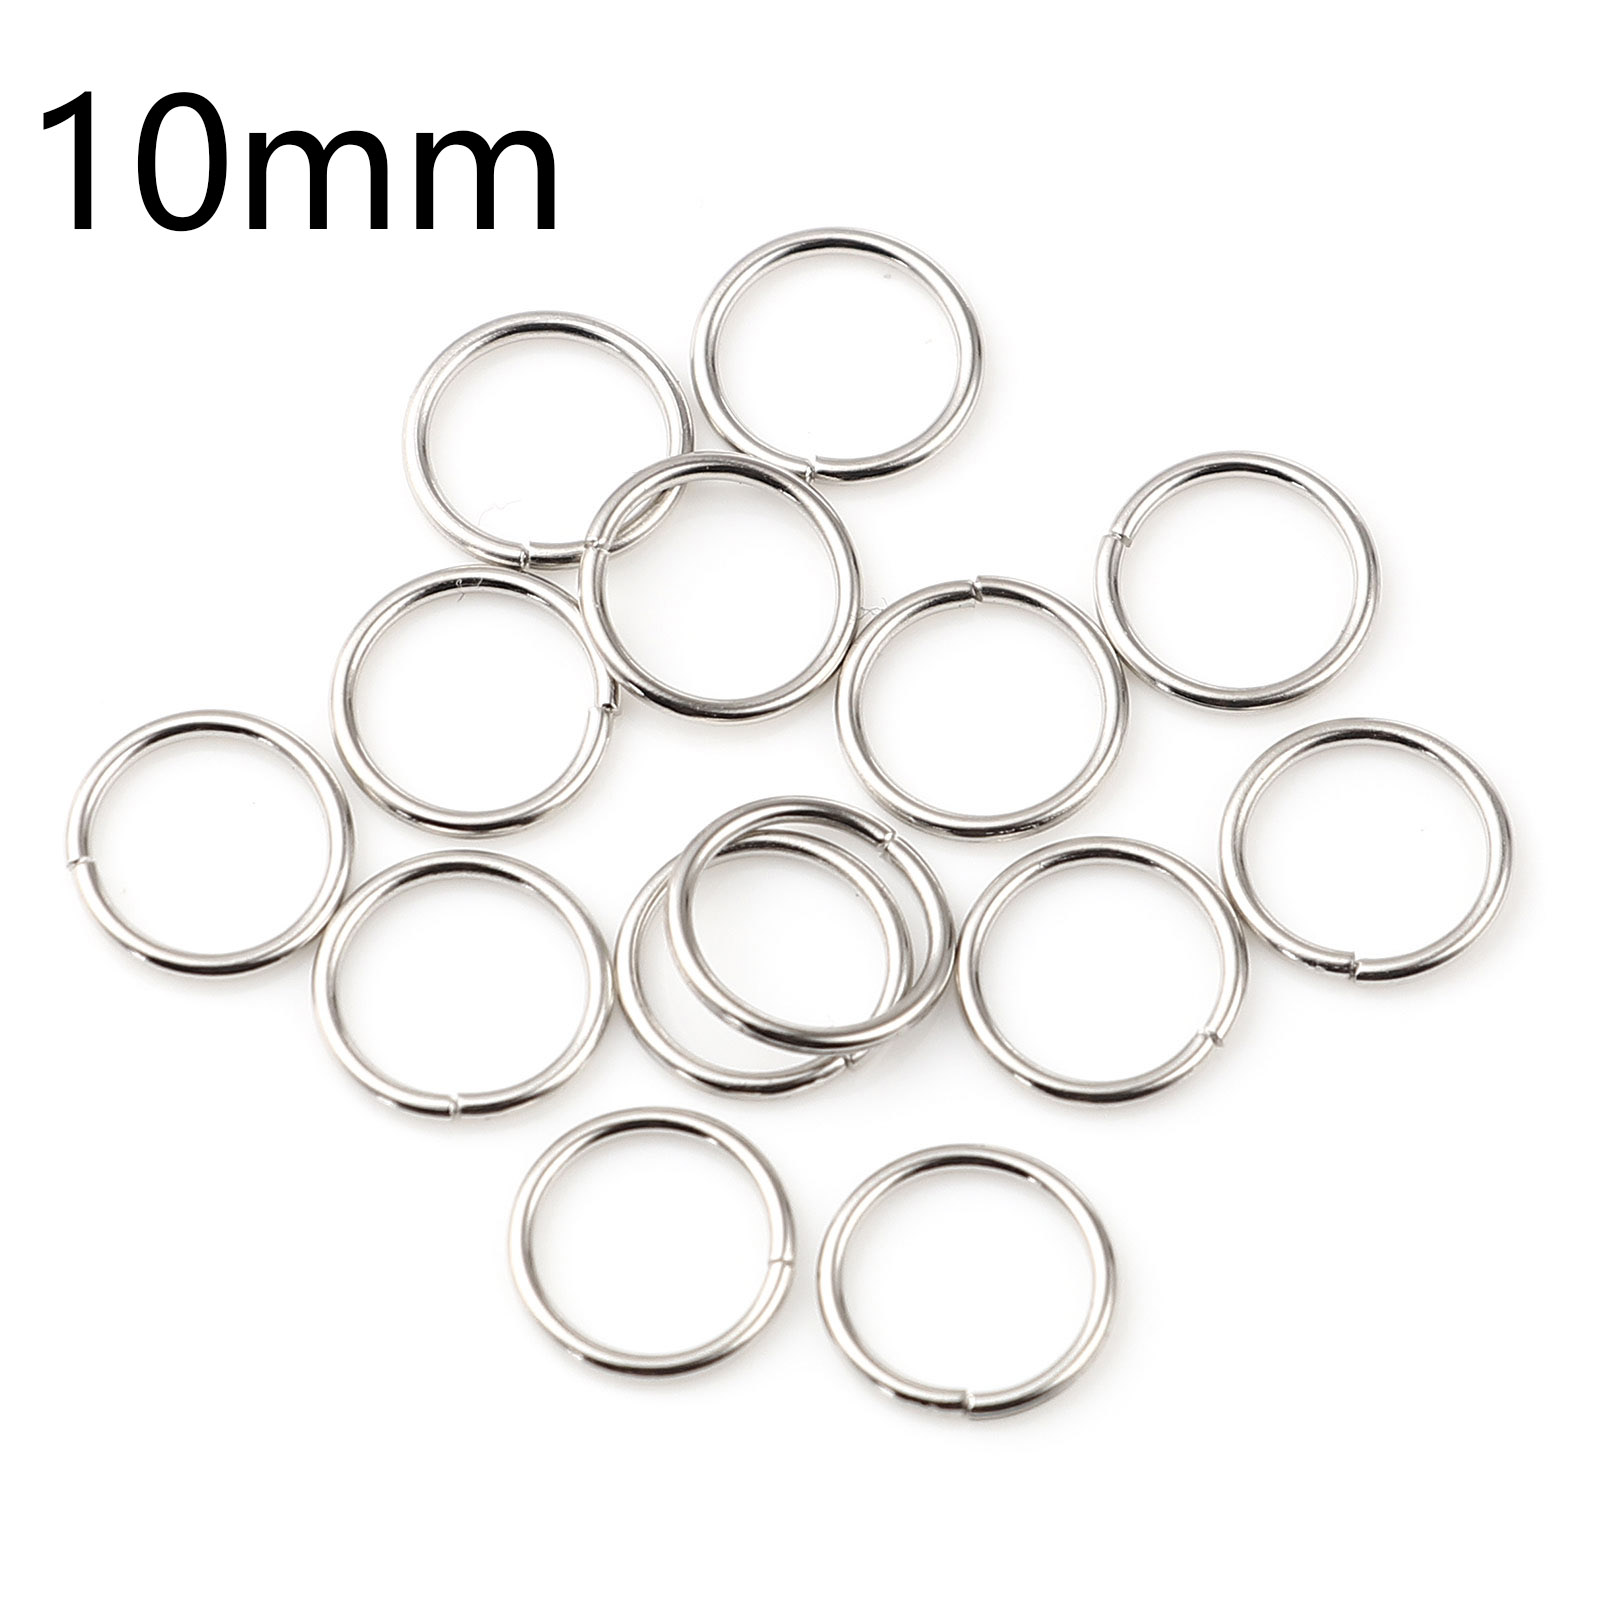 Picture of 1mm Iron Based Alloy Open Jump Rings Findings Circle Ring Silver Tone 10mm Dia, 200 PCs